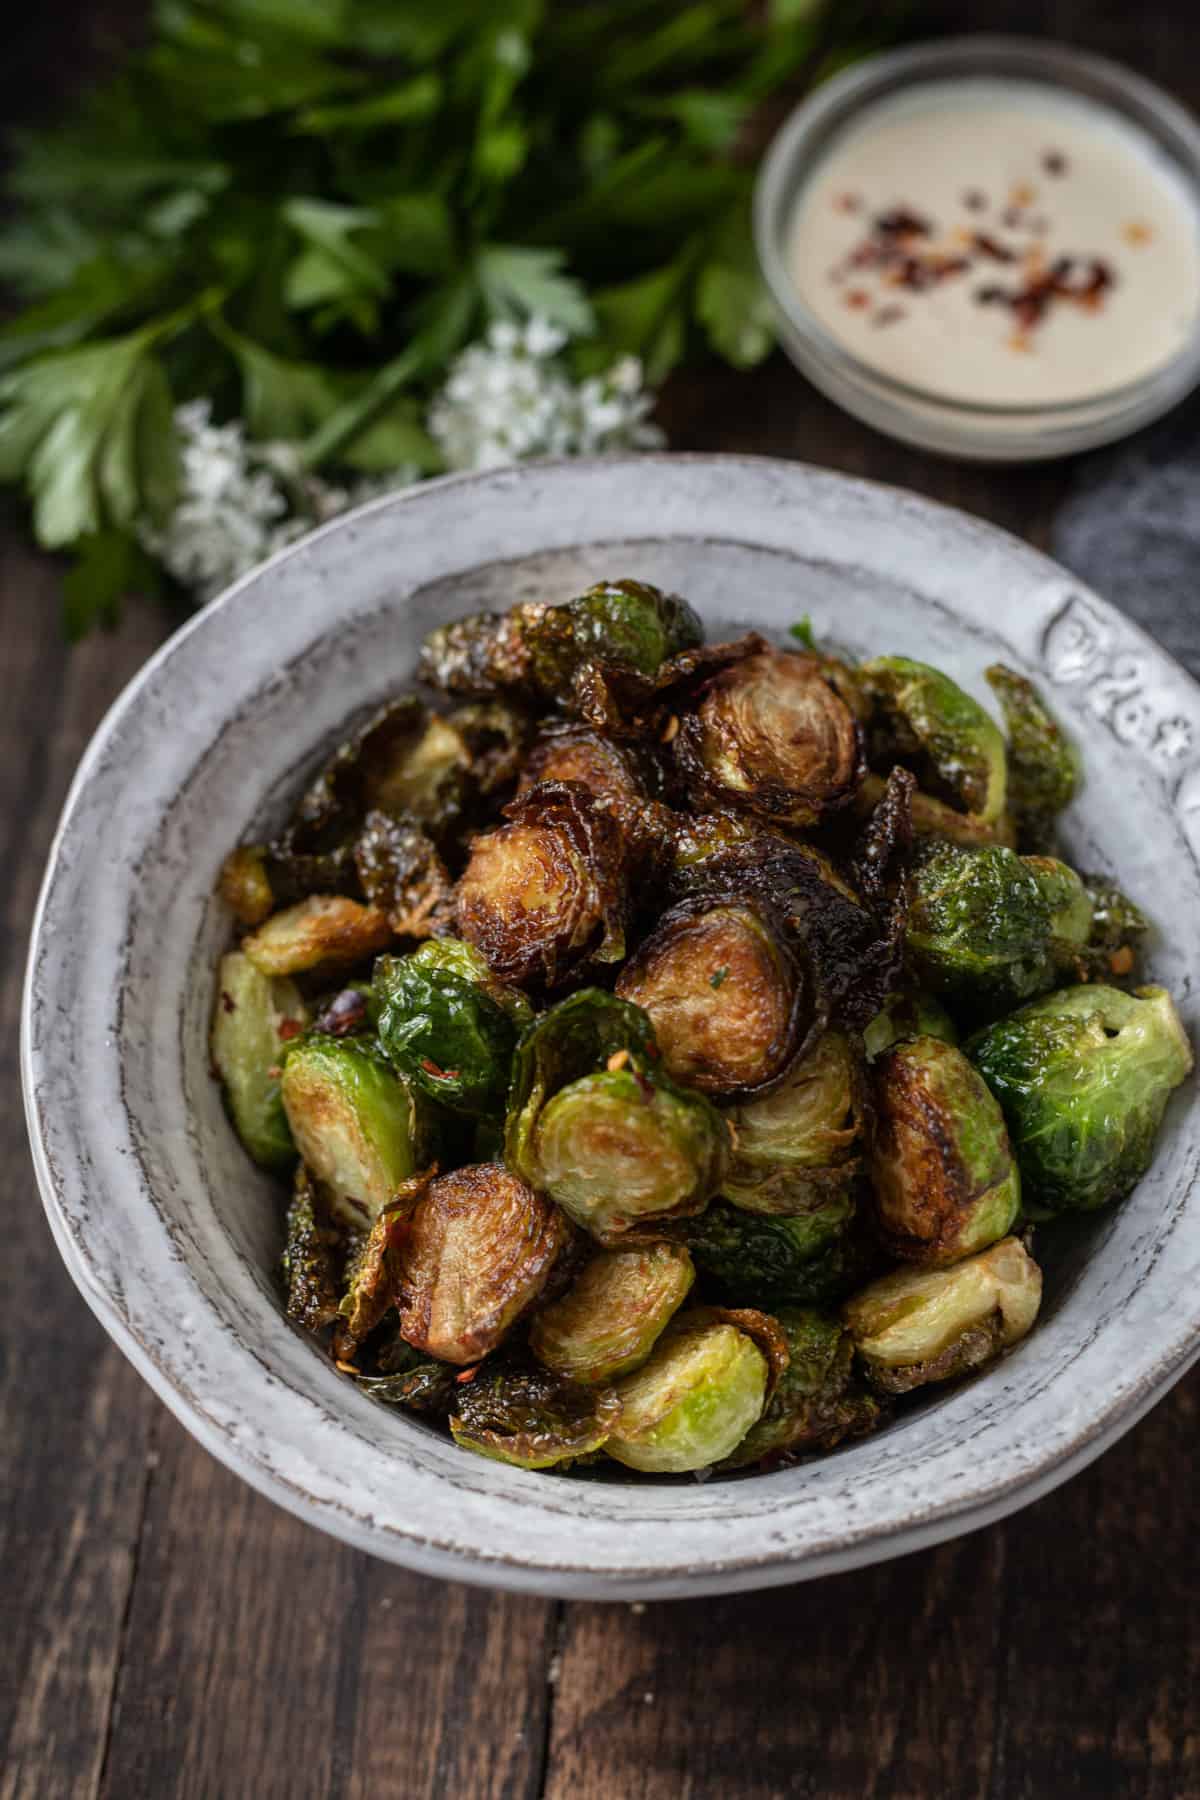 Bowlful of crispy fried Brussels sprouts.